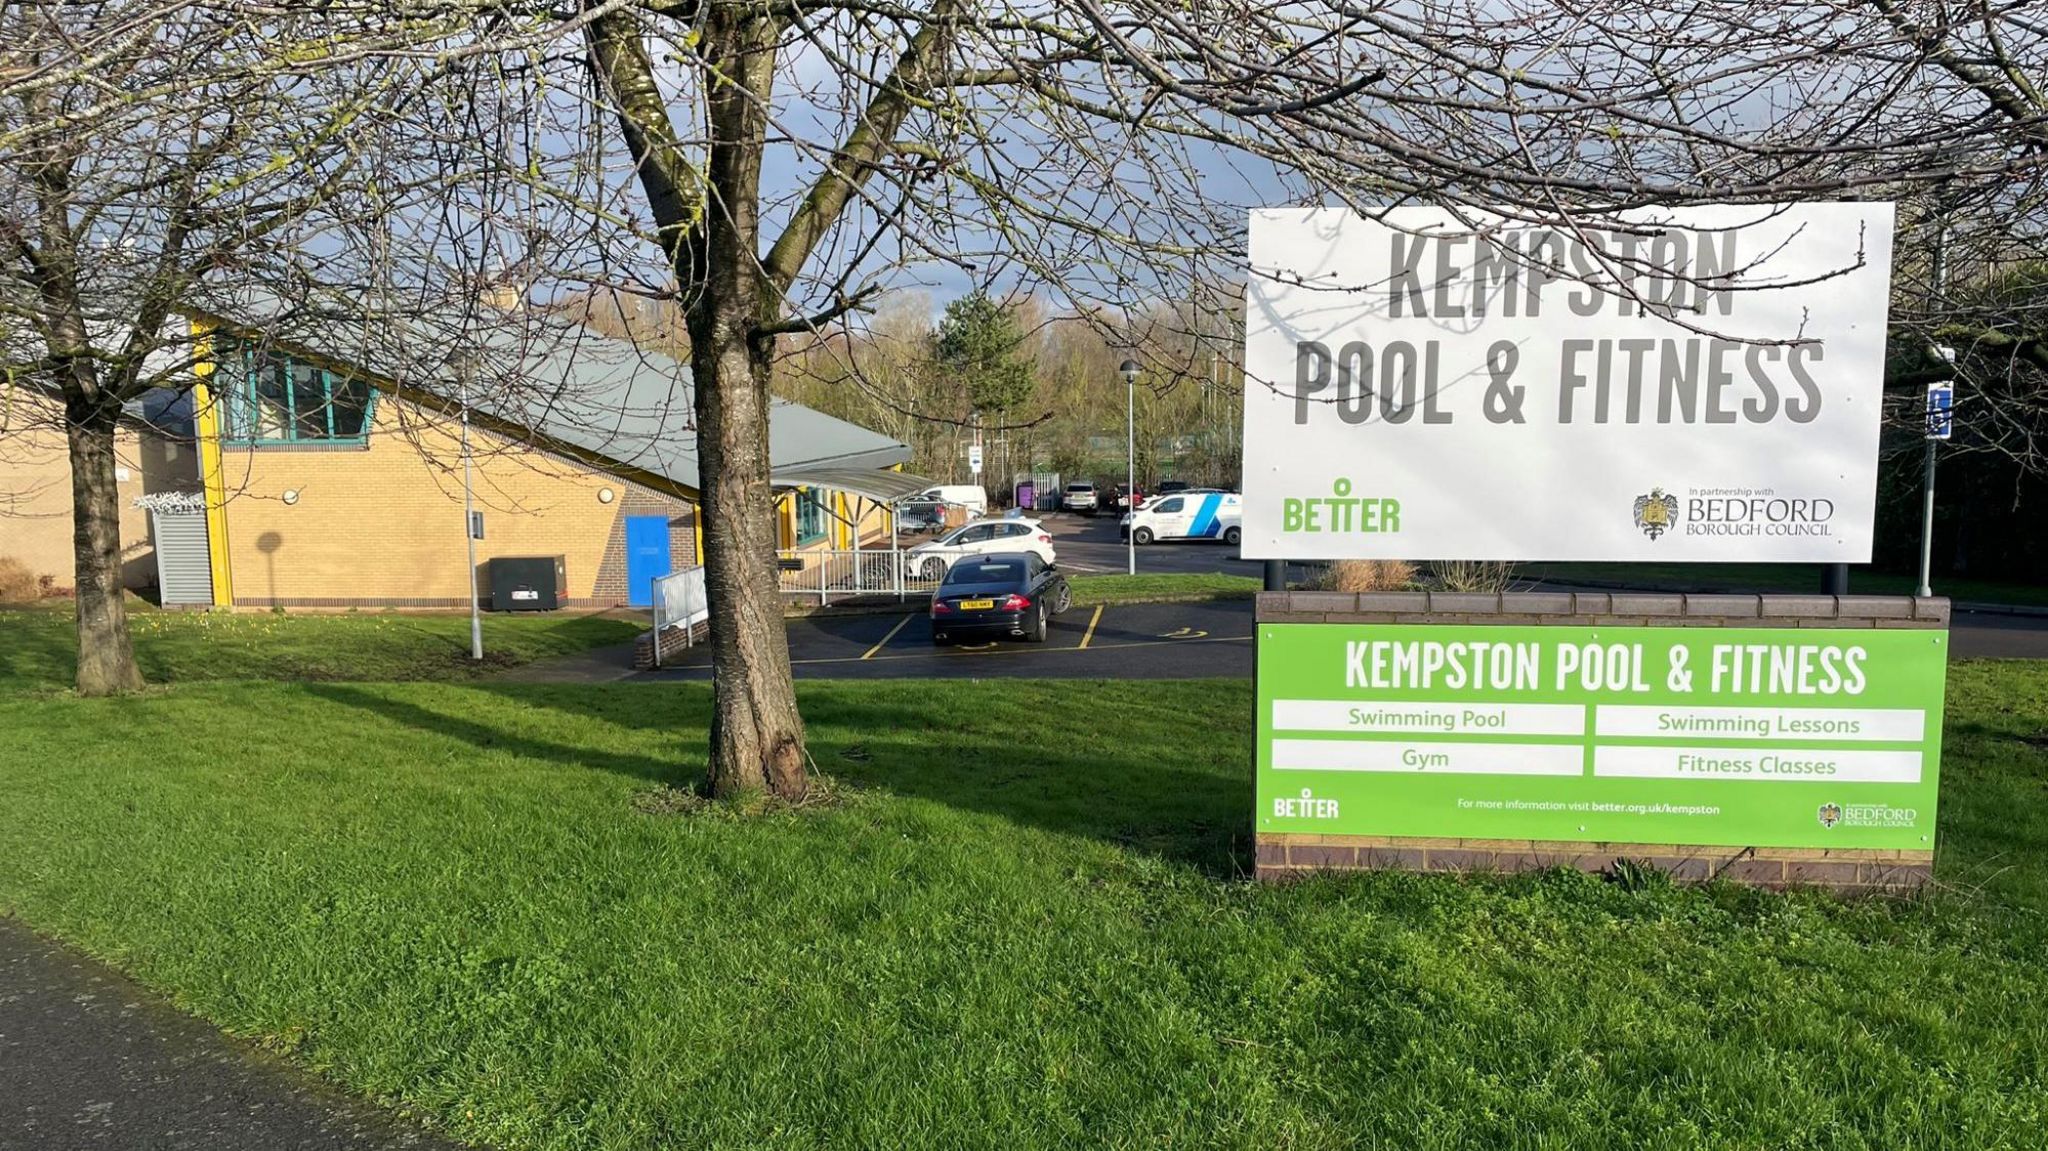 A view of Kempston Pool from the road